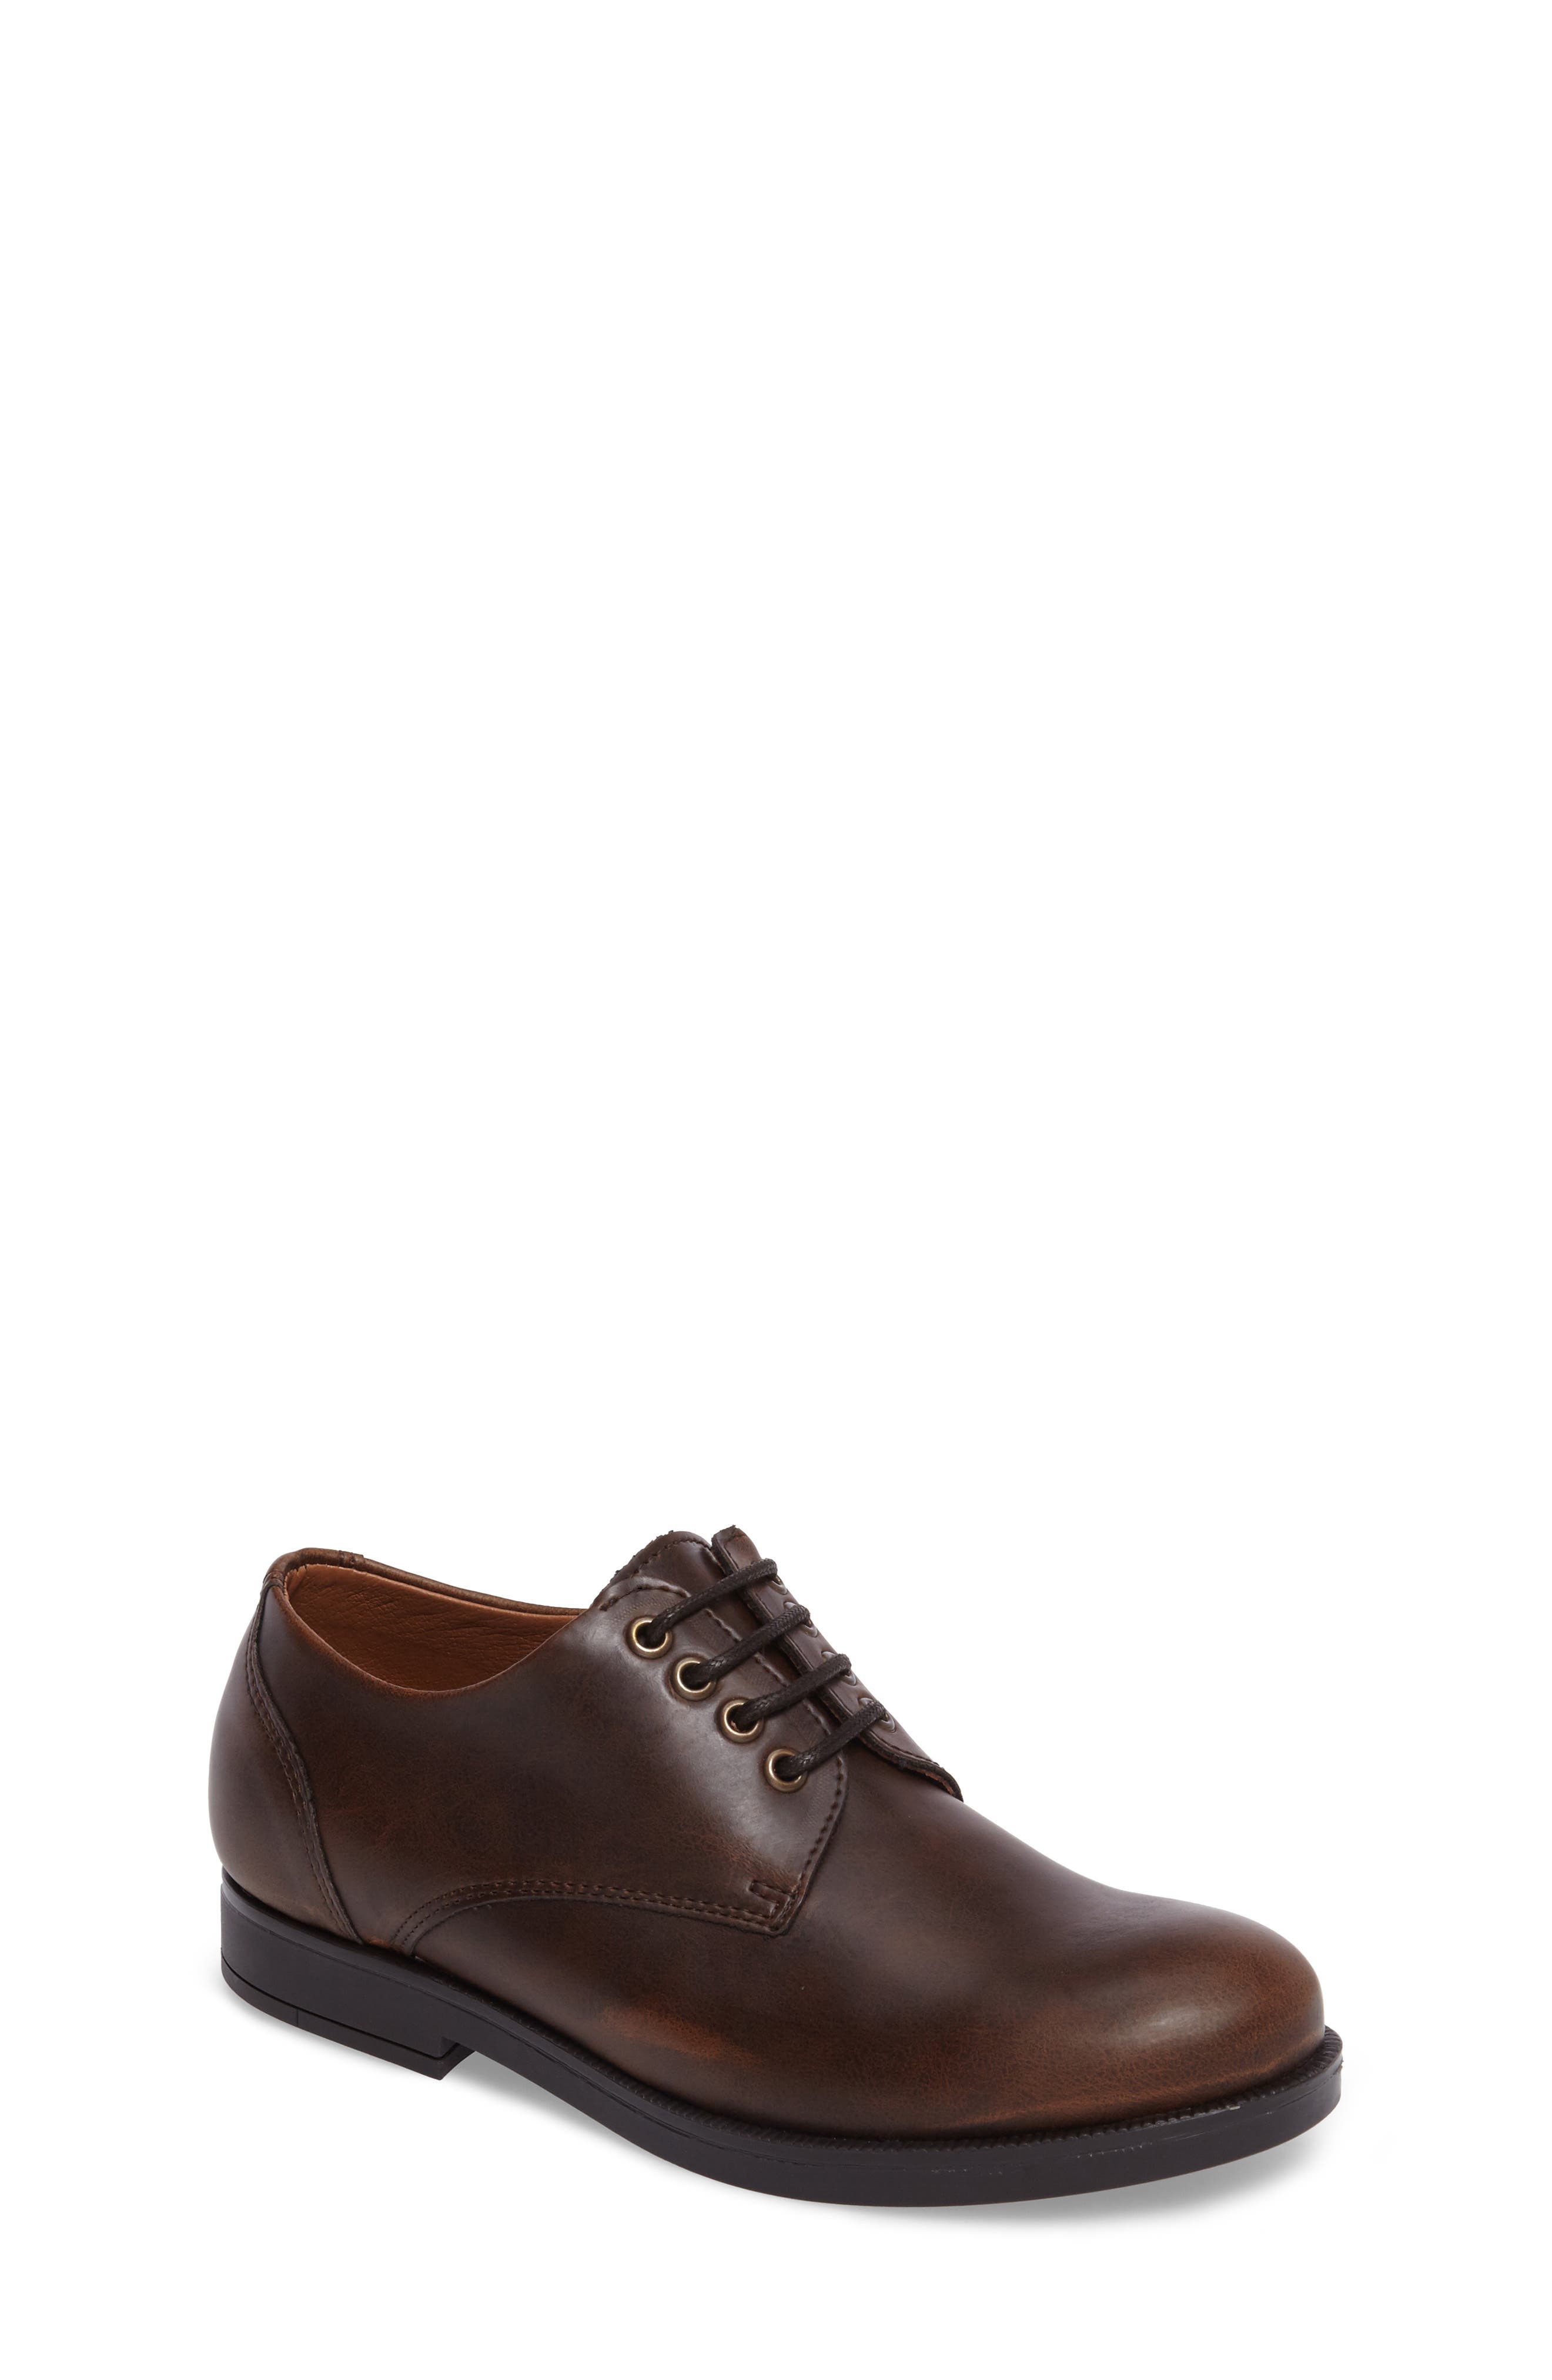 UPC 190937165900 product image for Boy's Vince Camuto Kalb Plain Toe Oxford, Size 3.5 M - Brown | upcitemdb.com